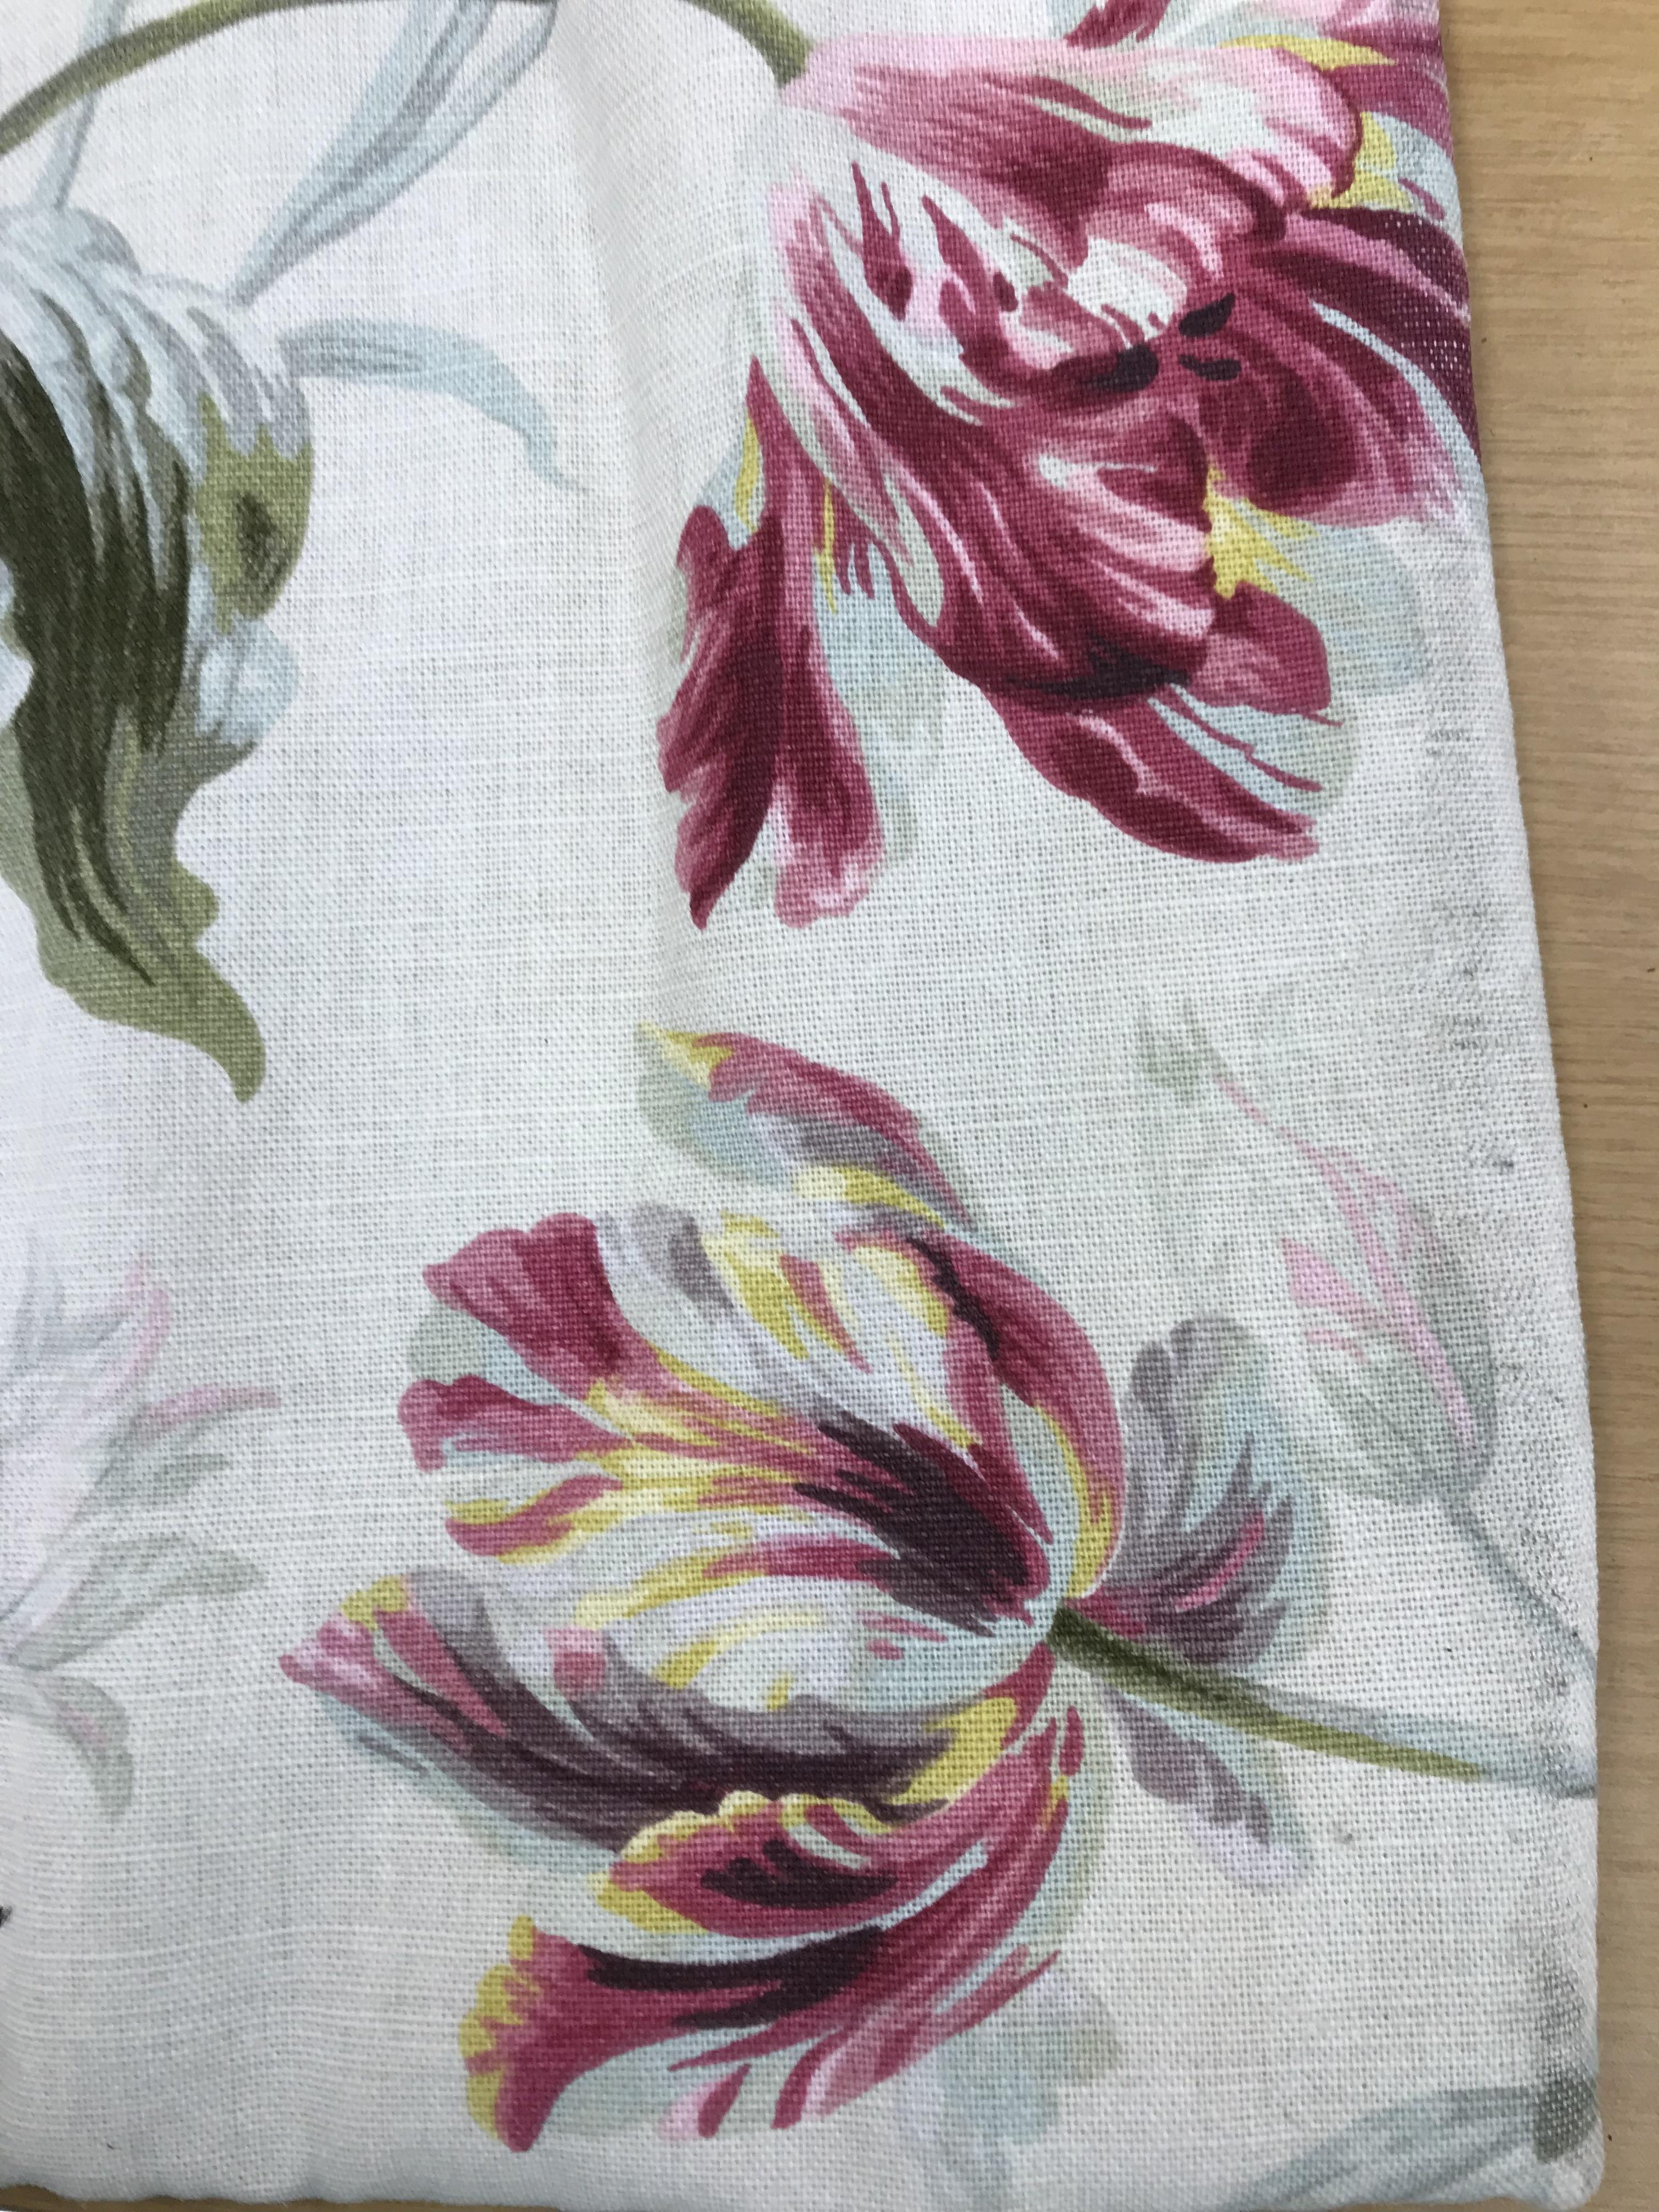 Three pairs of Laura Ashley linen weave curtains with a cream ground and pink and yellow tulip - Image 9 of 19